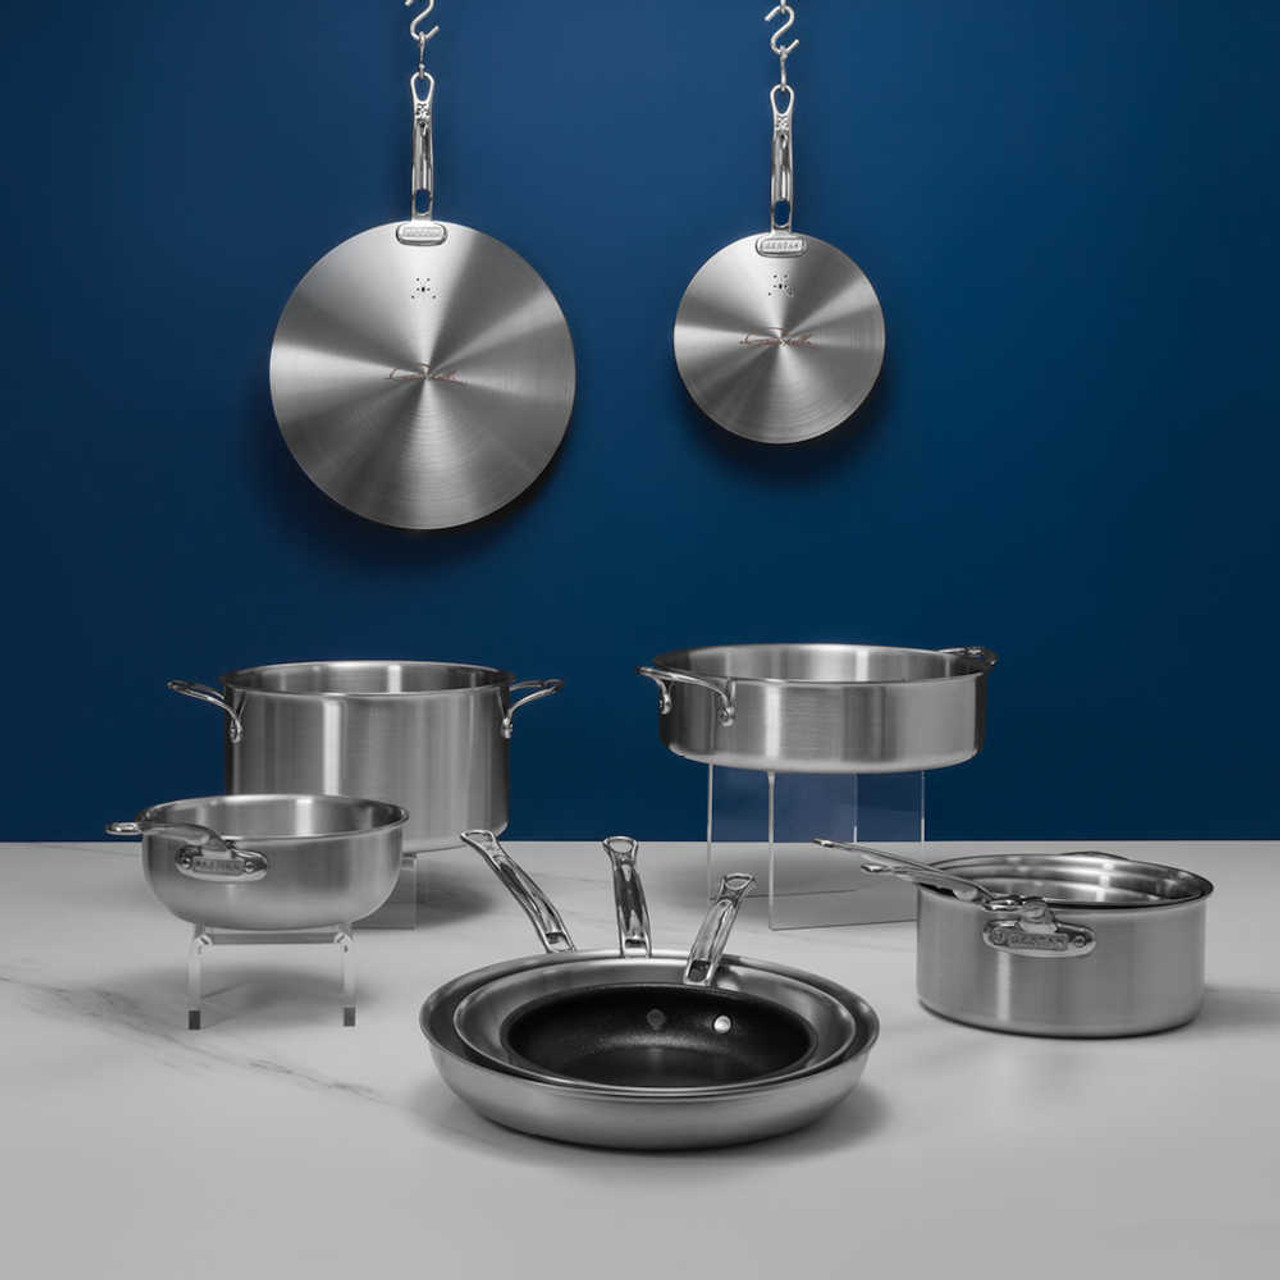 Thomas Keller Insignia Commercial Clad Stainless Steel 11-Piece Cookware Set  – Hestan Culinary